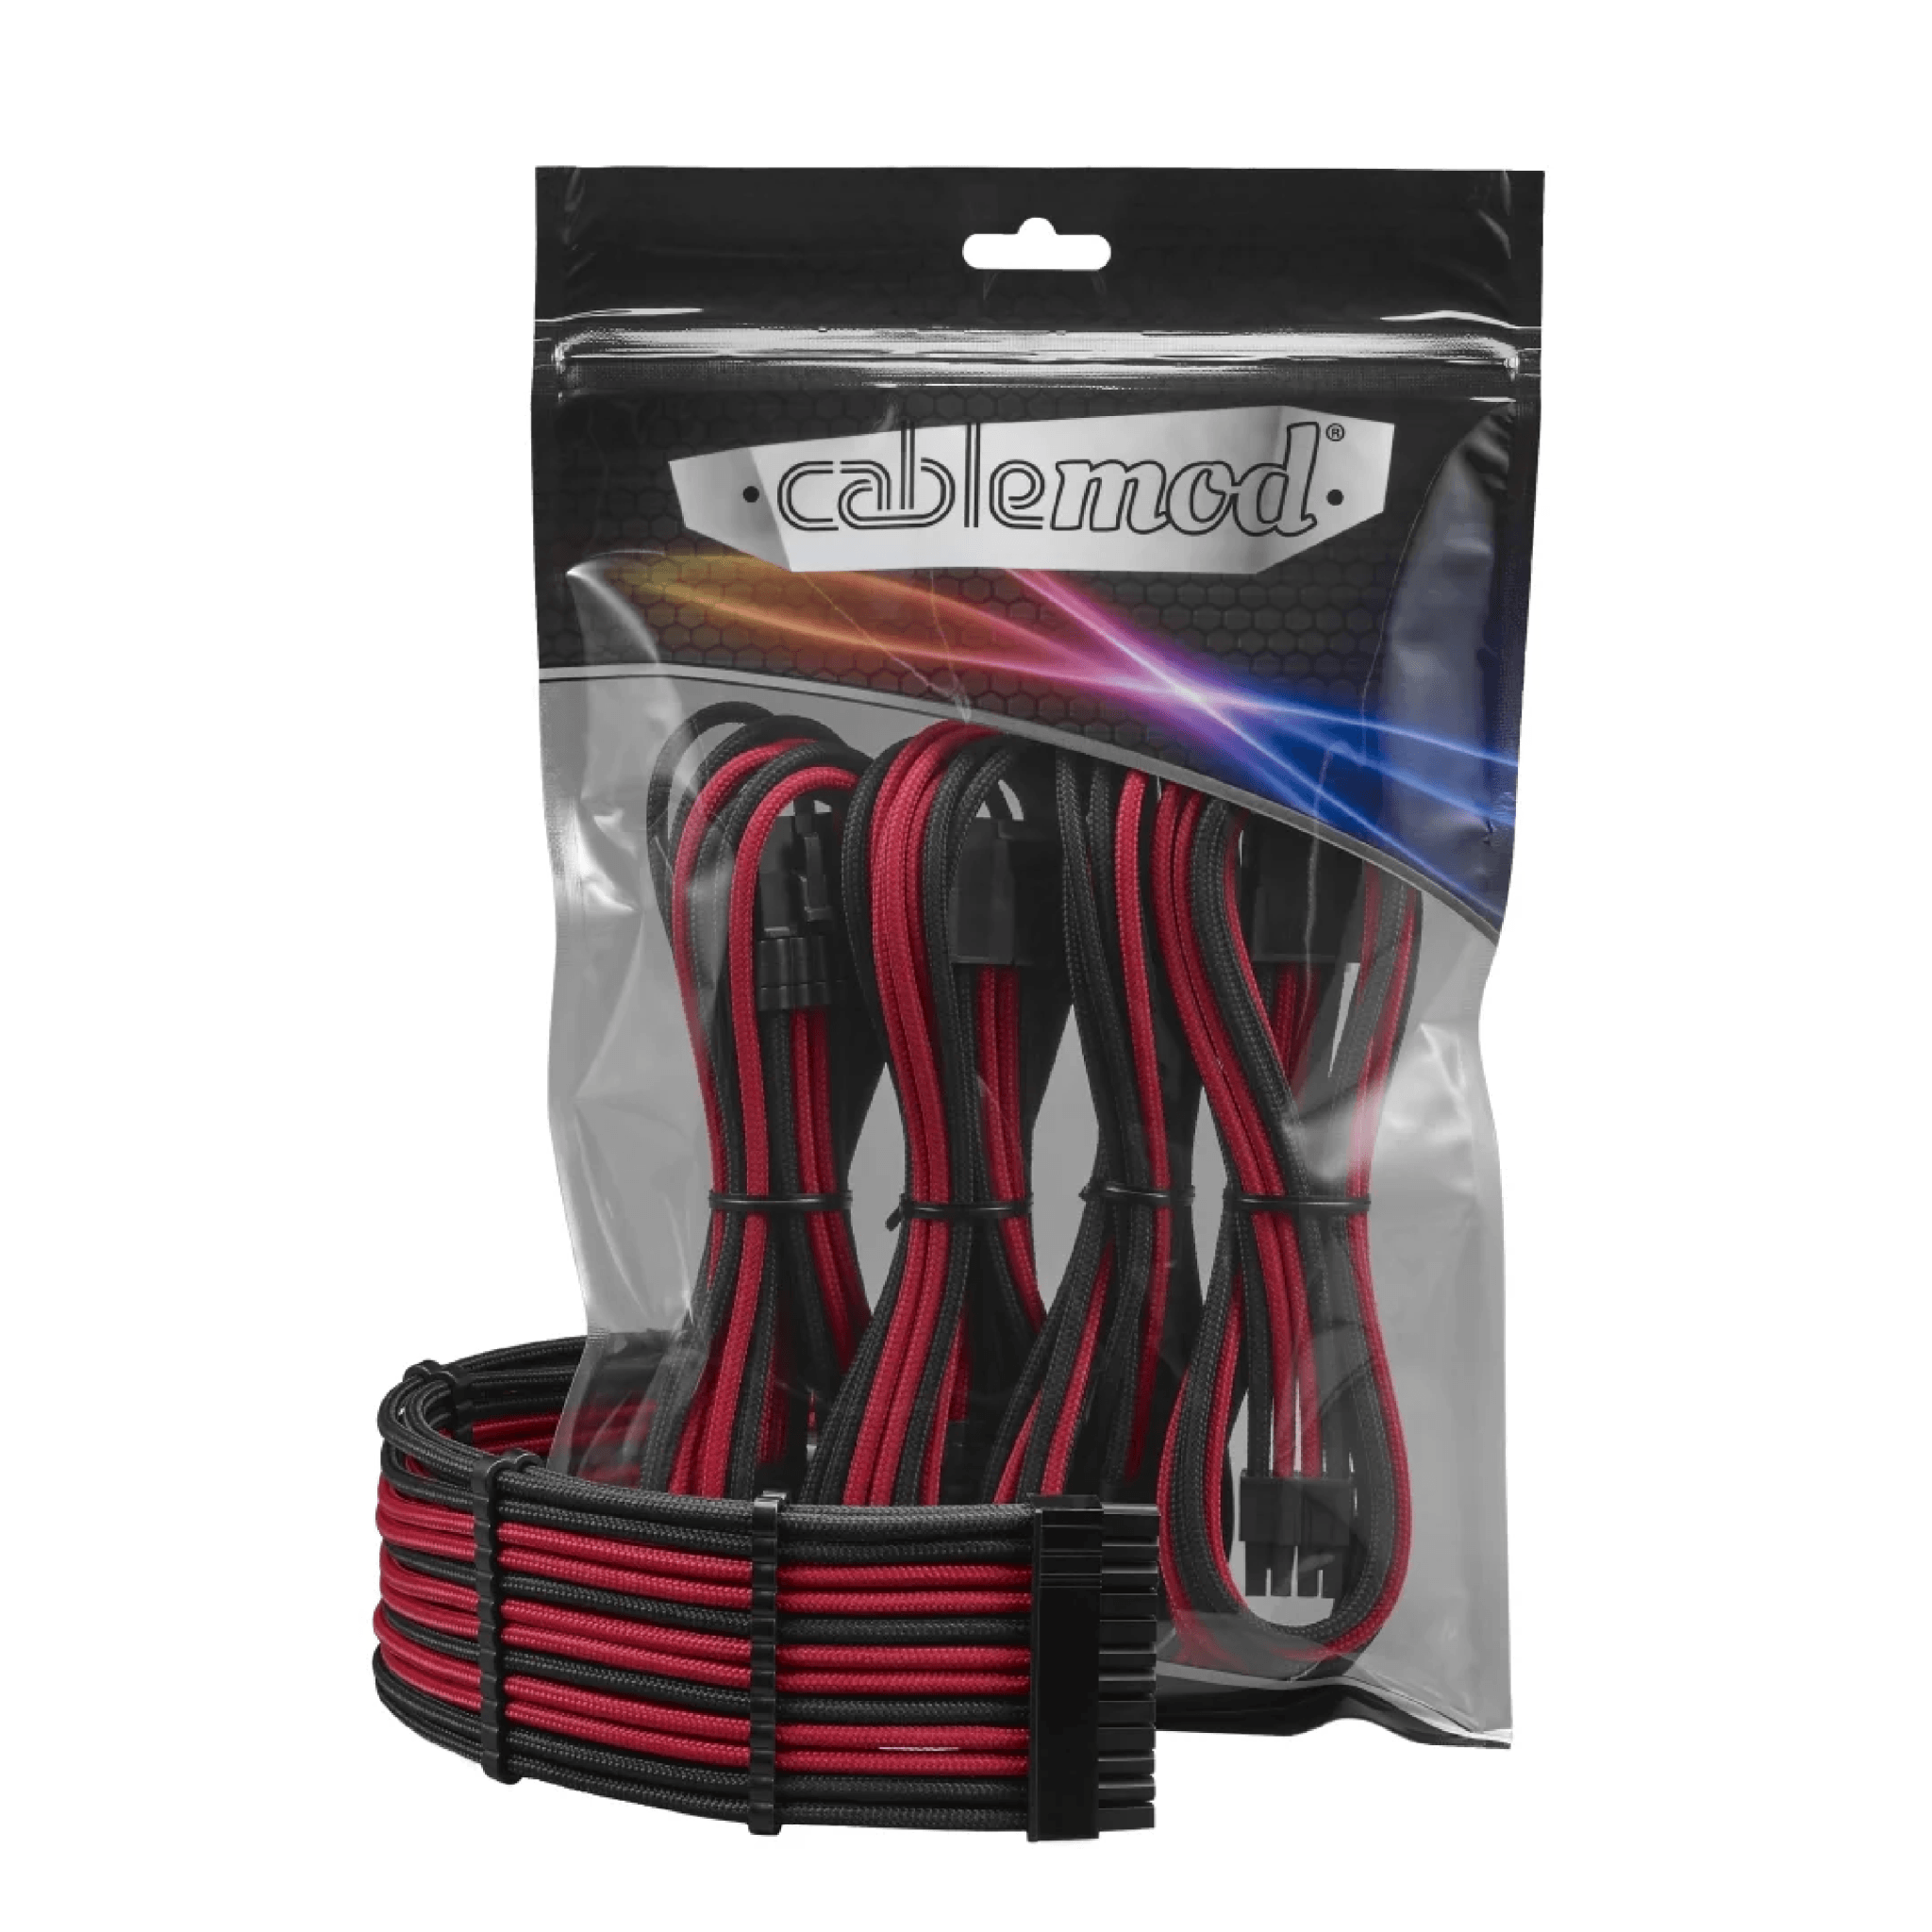 CableMod PRO ModFlex Cable Extension Kit - 8+6 Series - Black/Red - Store 974 | ستور ٩٧٤